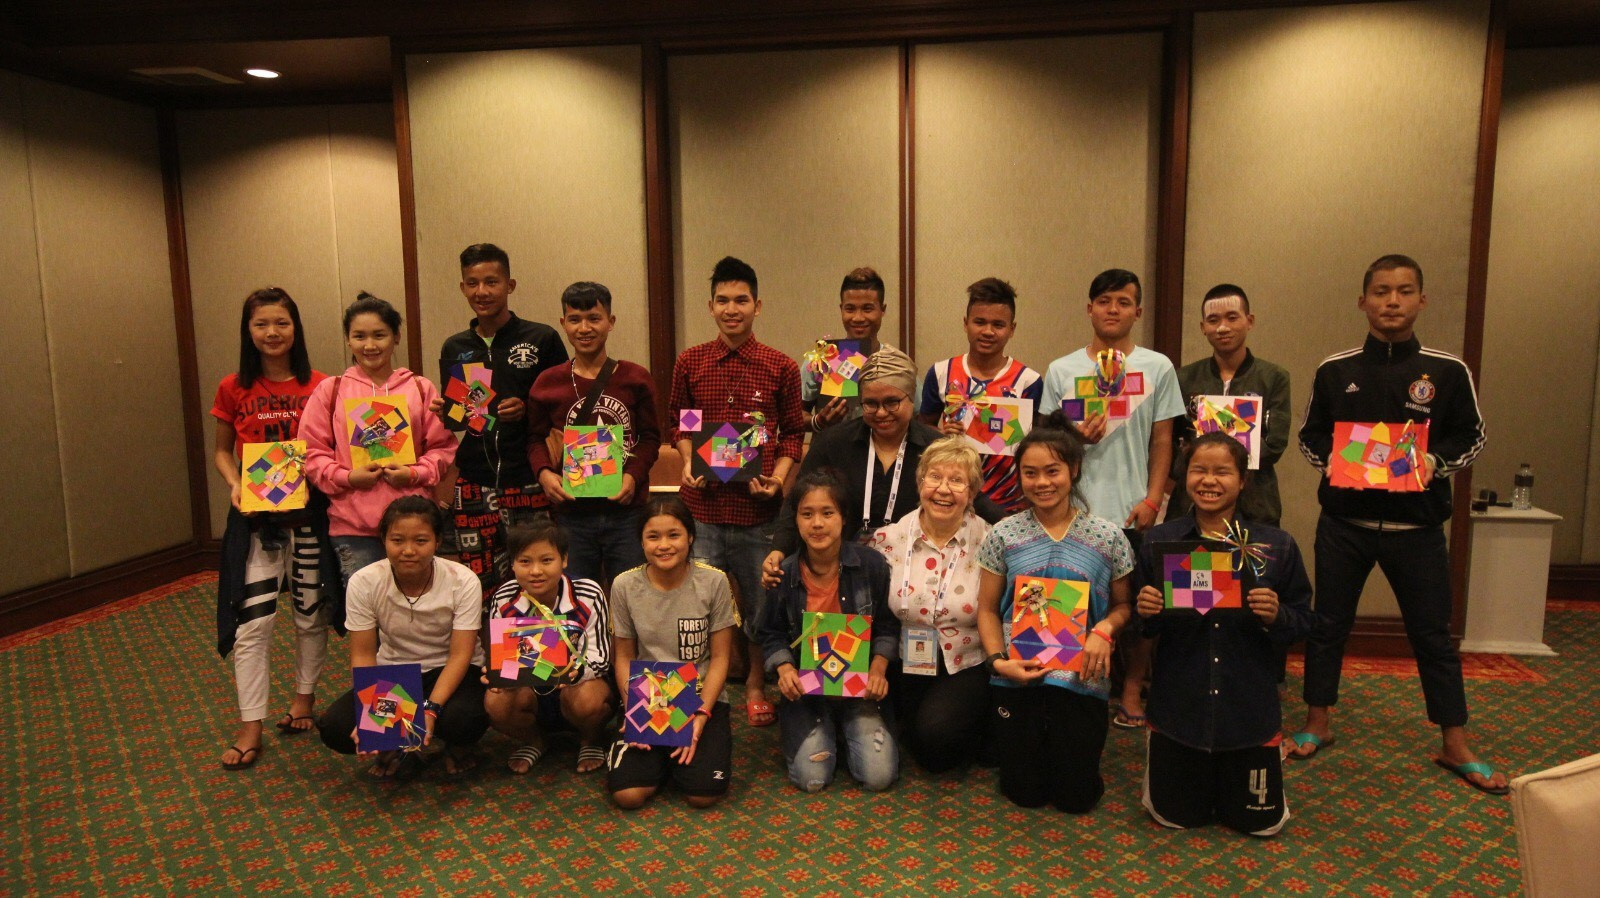 IFMA and AIMS have invited displaced children to create sport-related crafts©IFMA